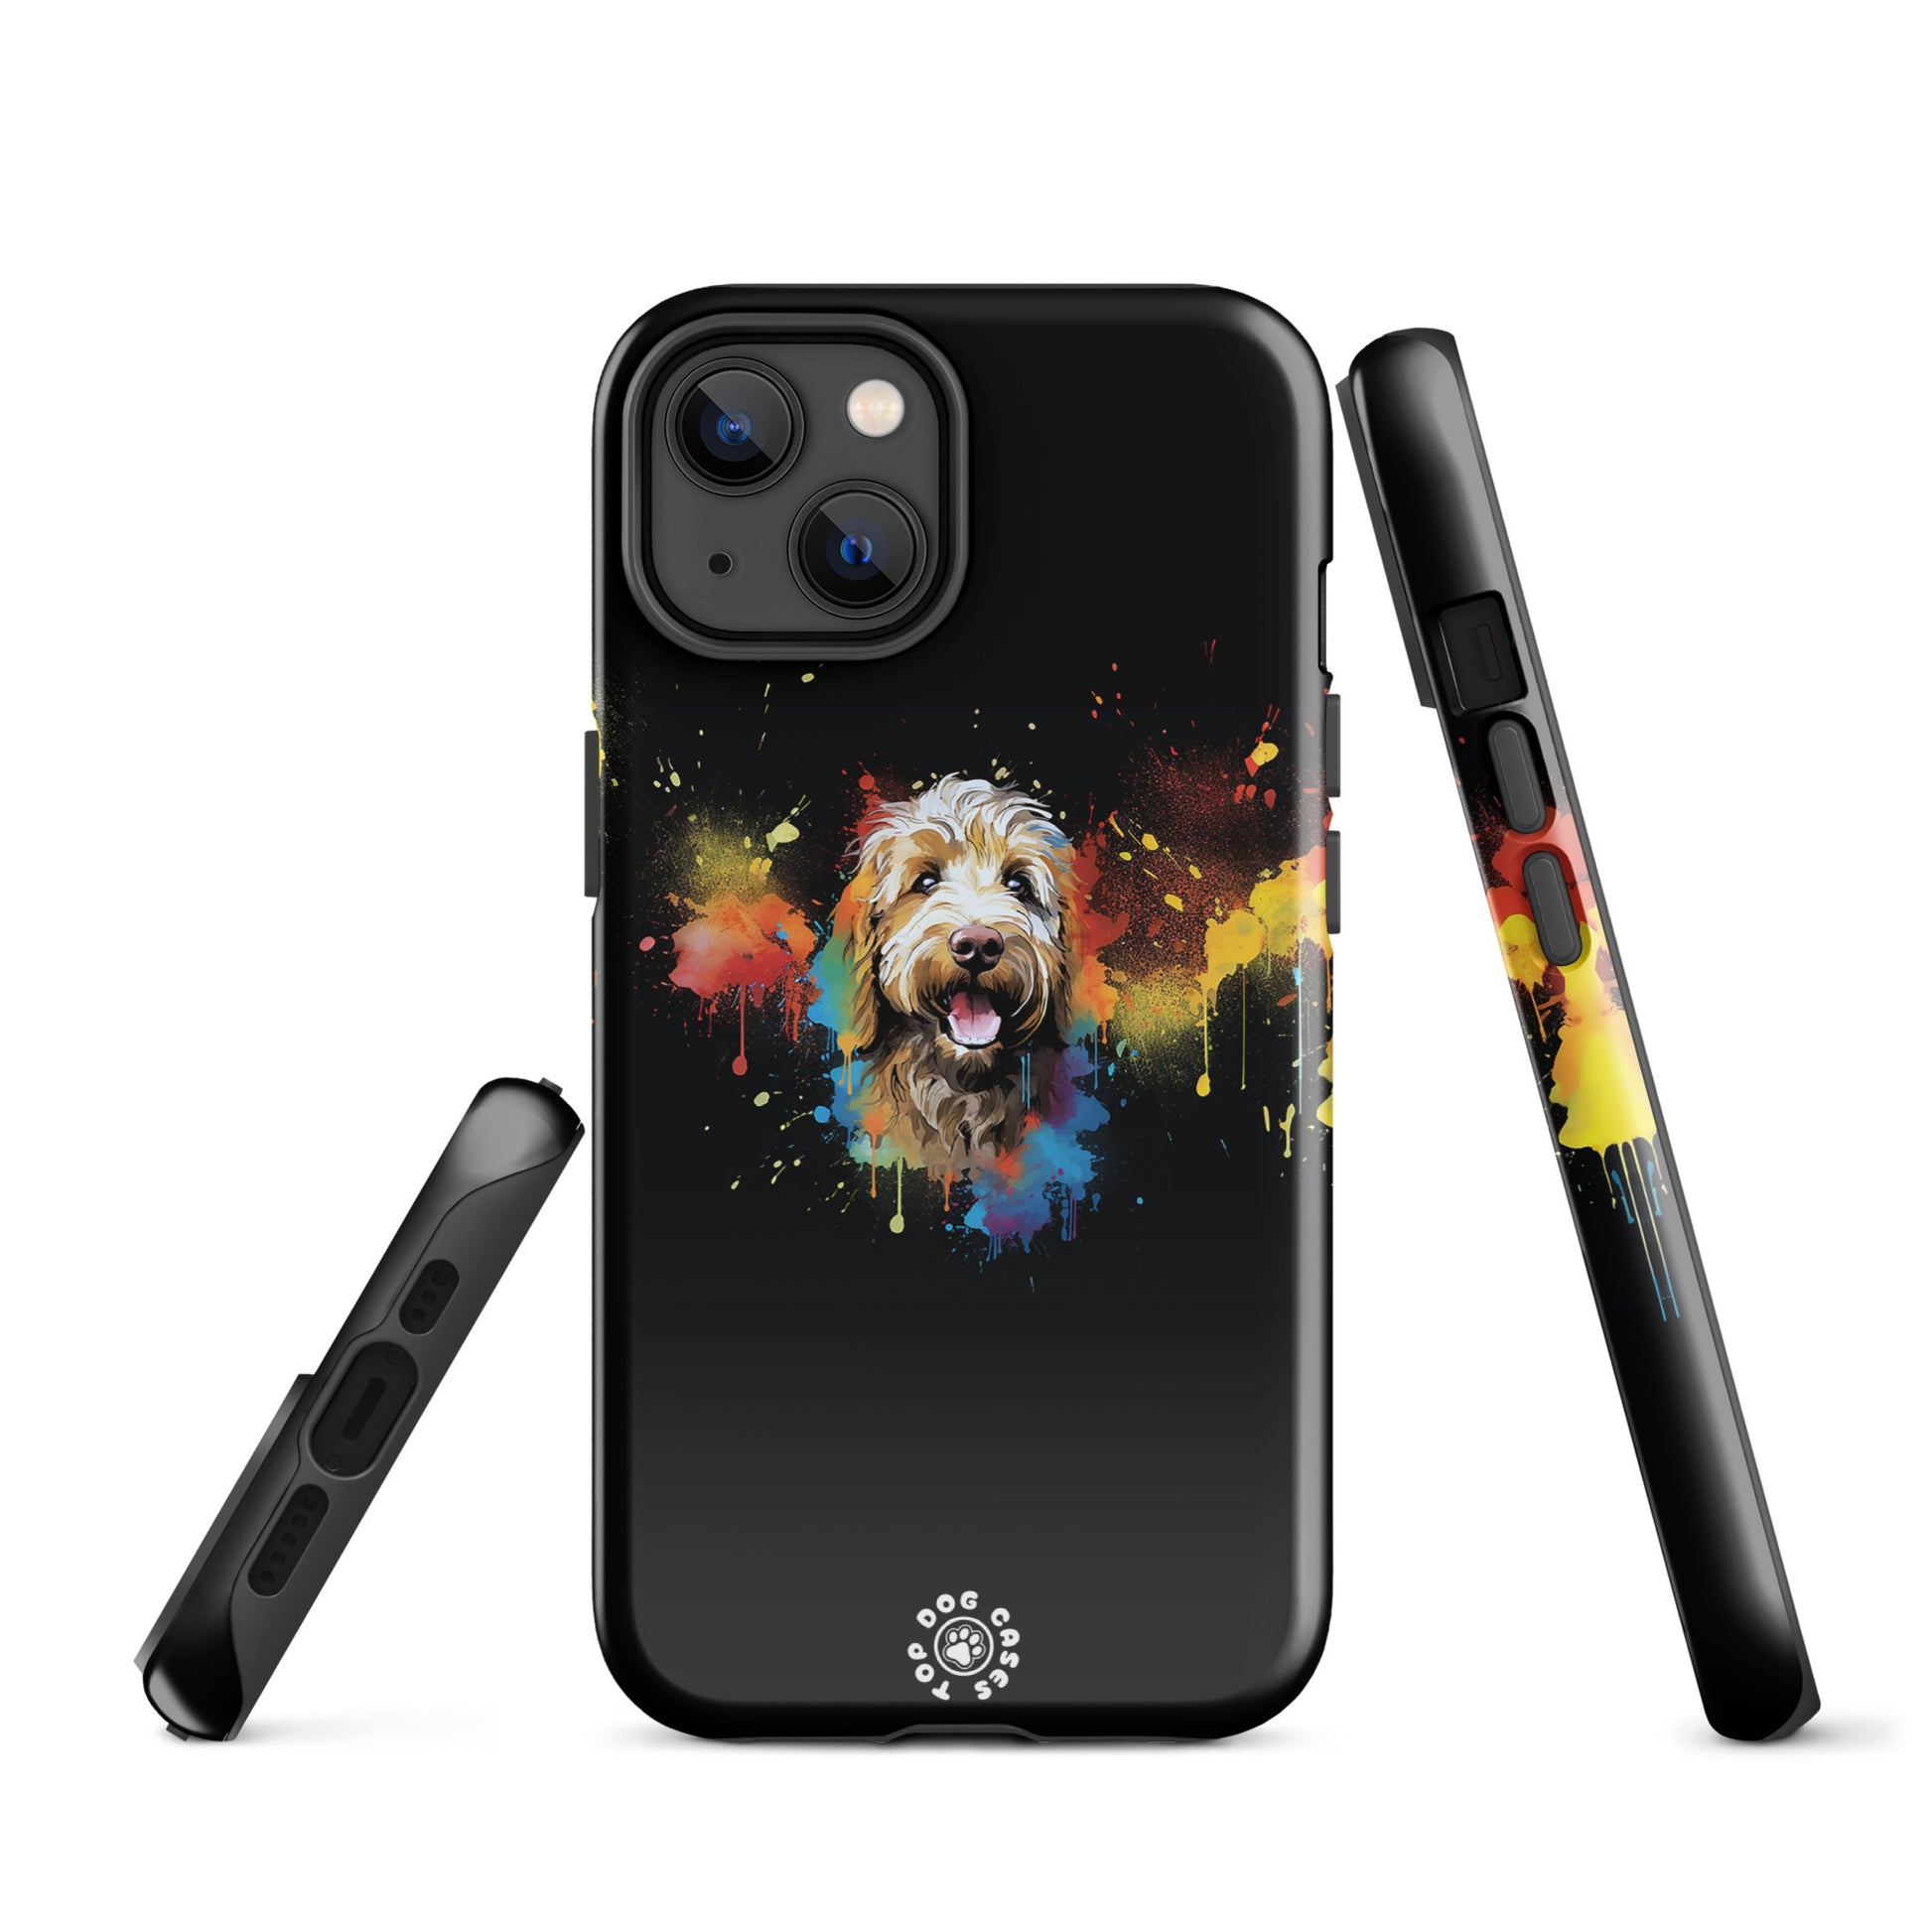 Goldendoodle- Colorful Phone Case - iPhone Case - Top Dog Cases - #ColorfulPhoneCases, #Goldendoodle, #iPhone, #iPhone11, #iphone11case, #iPhone12, #iPhone12case, #iPhone13, #iPhone13case, #iPhone13DogCase, #iPhone13Mini, #iPhone13Pro, #iPhone13ProMax, #iPhone14, #iPhone14case, #iPhone14DogCase, #iPhone14Plus, #iPhone14Pluscase, #iPhone14Pro, #iPhone14ProMax, #iPhone14ProMaxCase, #iPhone15, #iPhone15case, #iPhonecase, #iphonedogcase, #MiniGoldendoodle, #MiniGoldendoodleCase